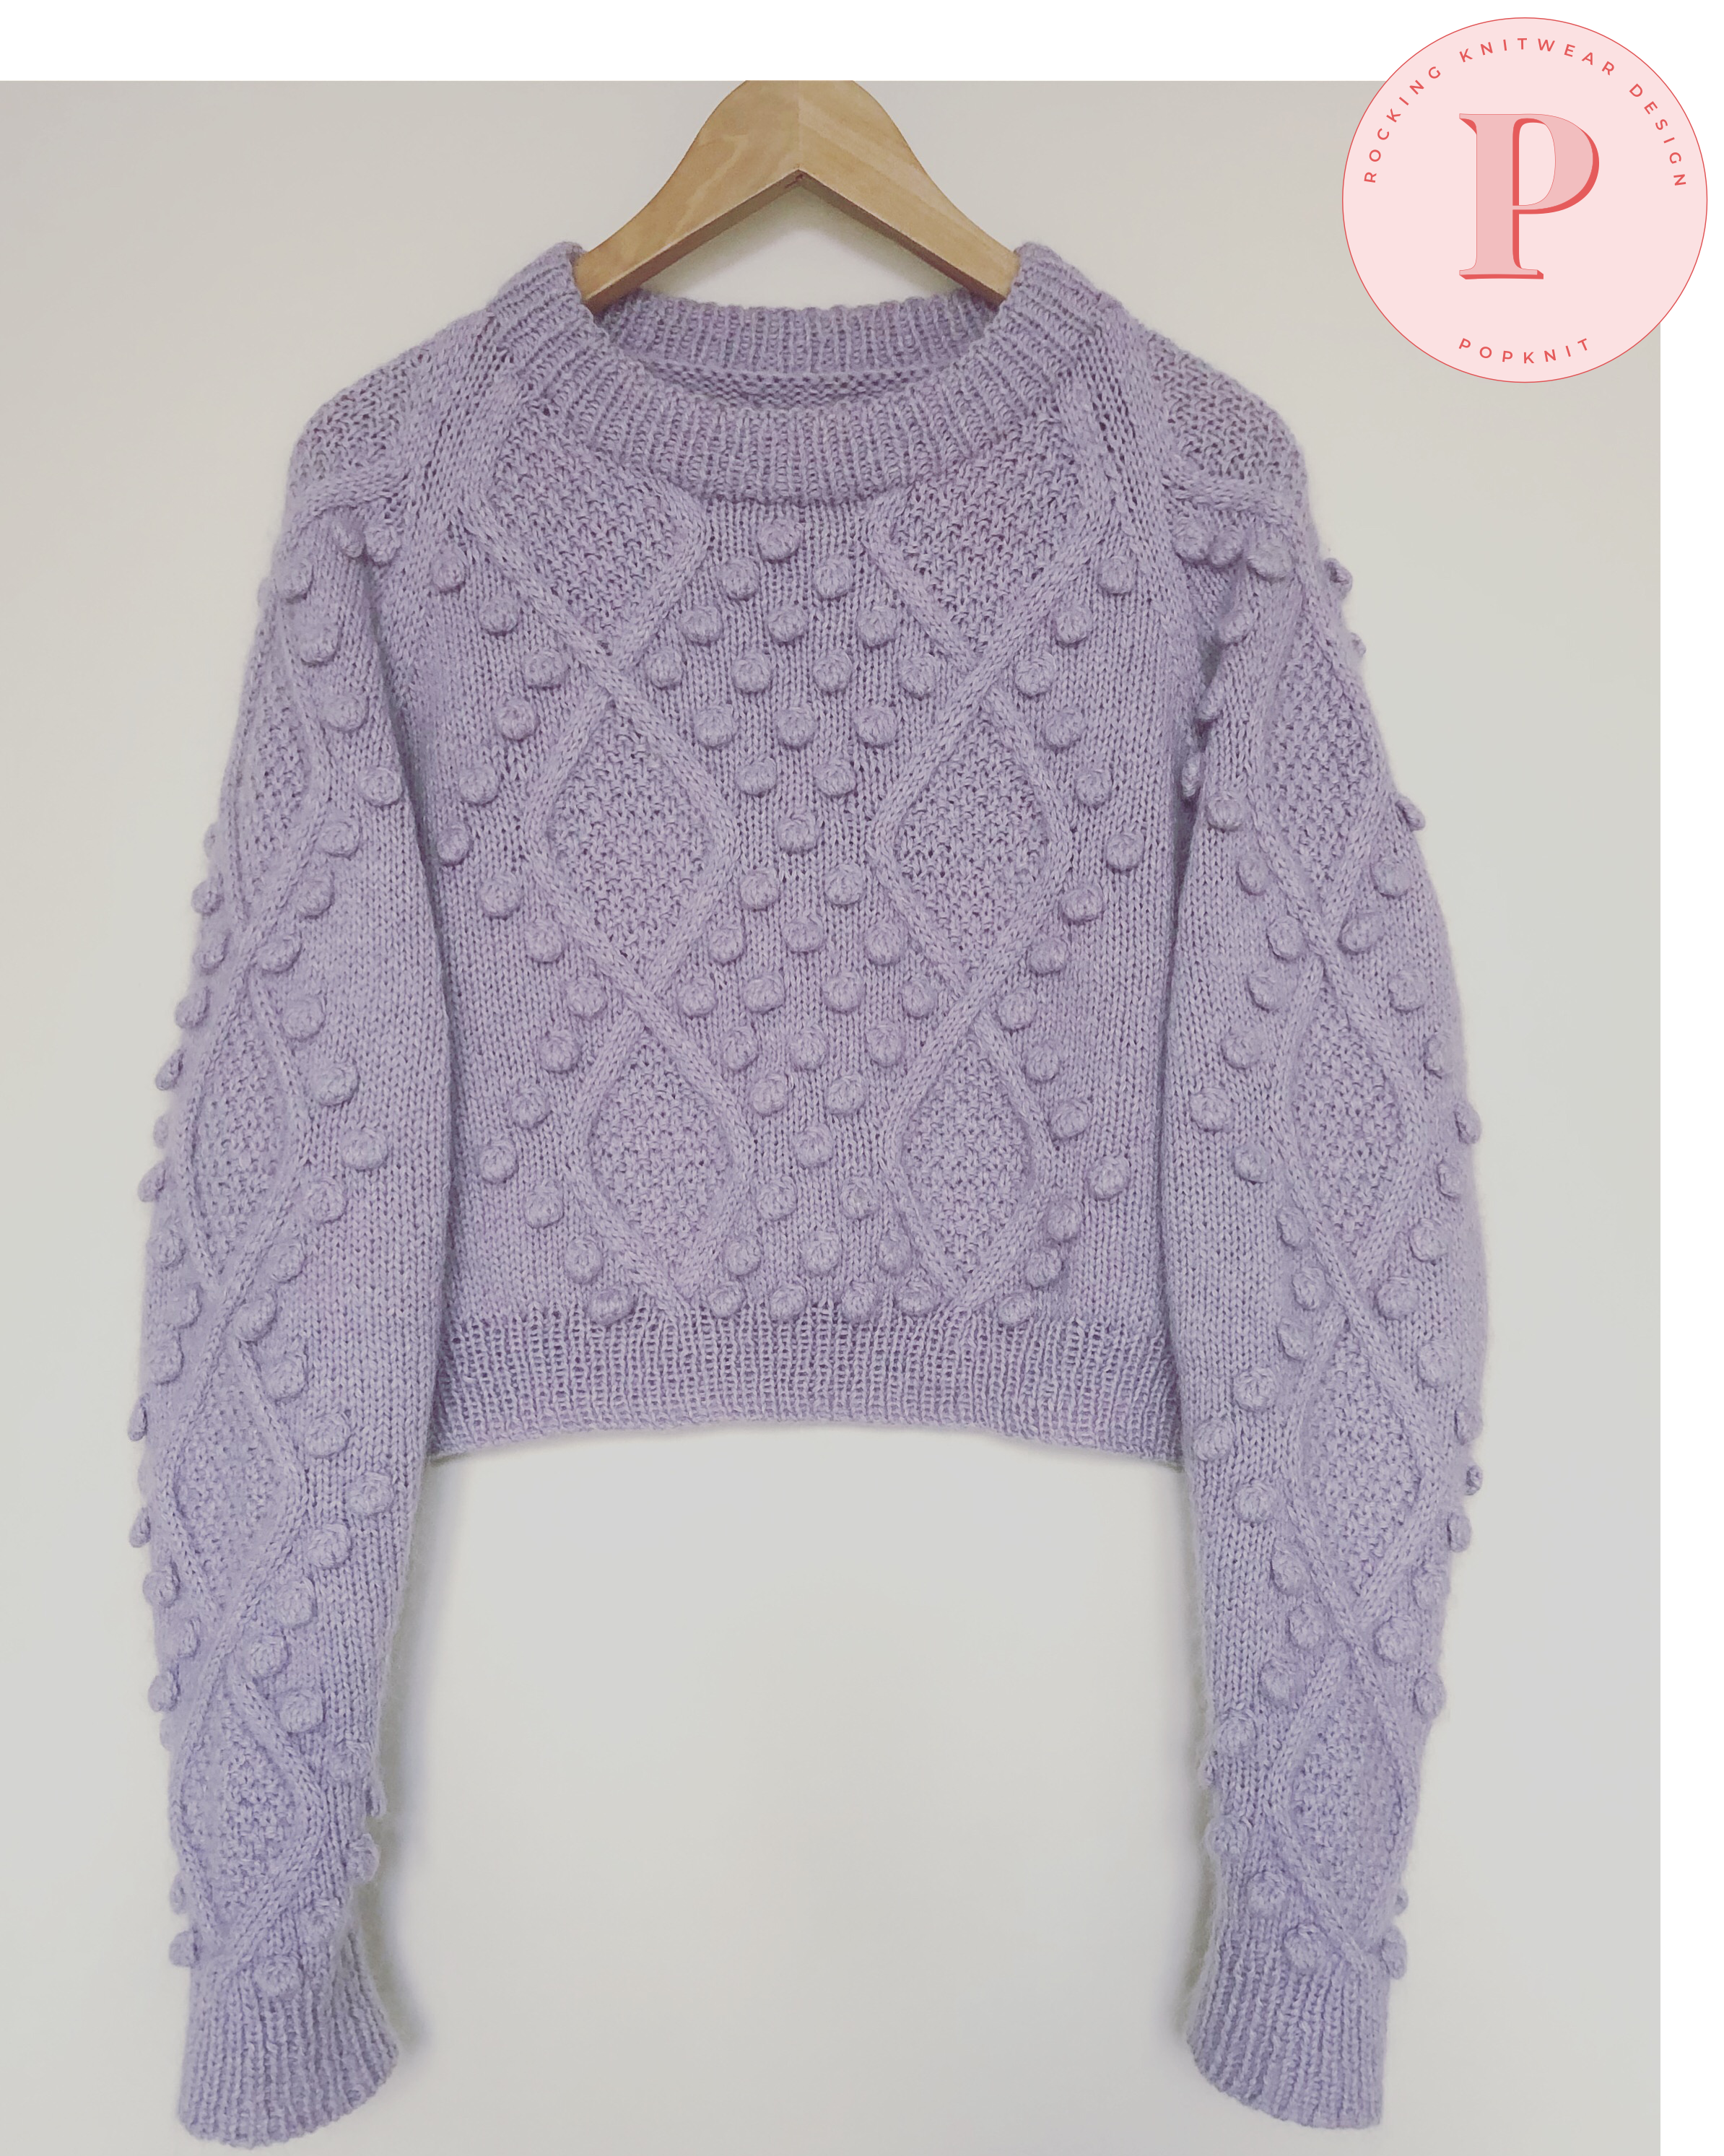 Diamond and Pearls Sweater af Popknit